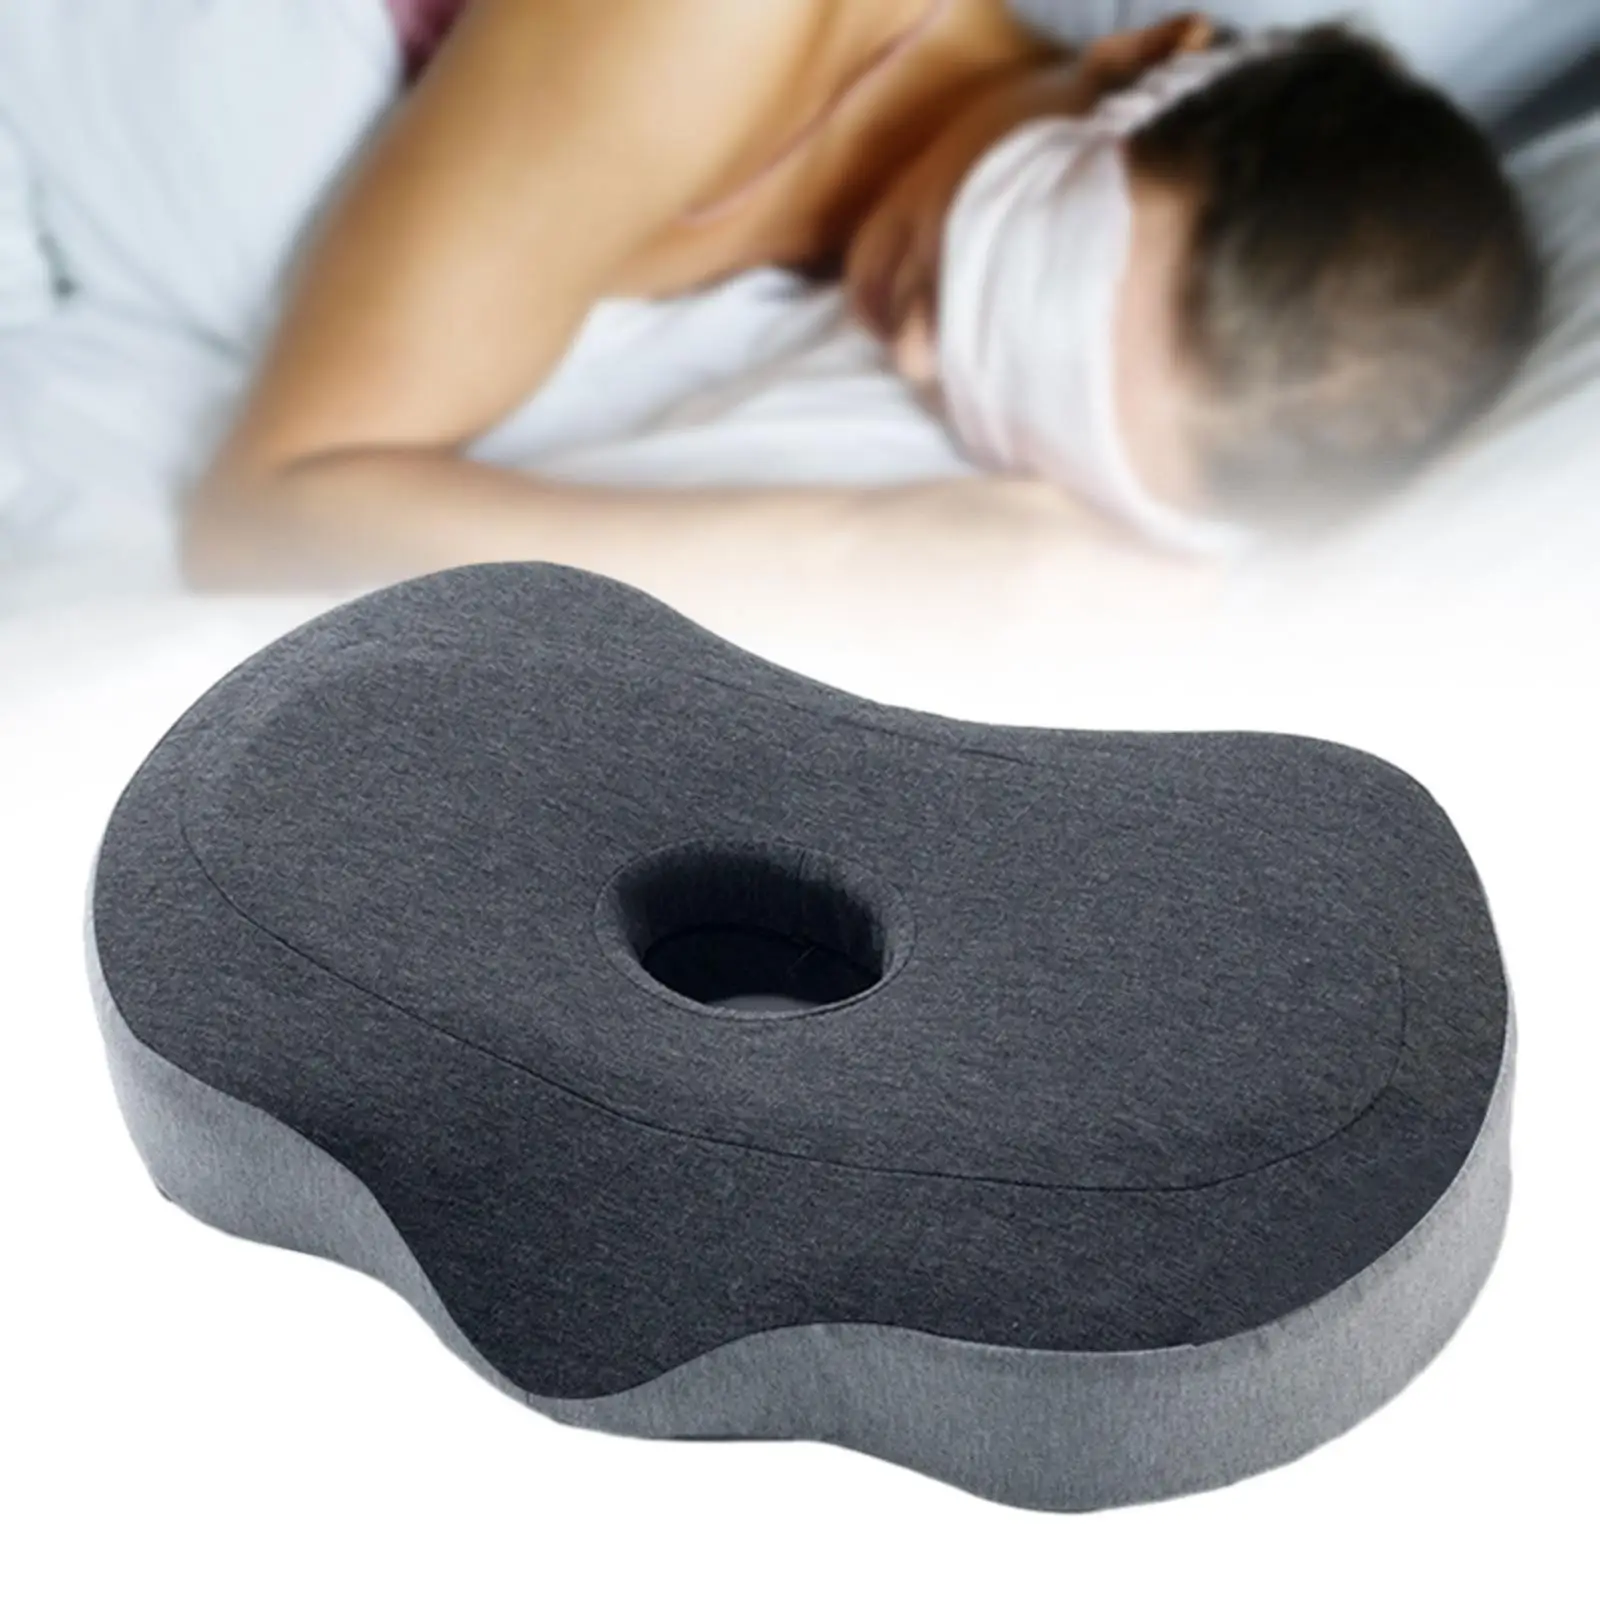 Ear Piercing Pillow Small Pillow with Ear Hole for Side Sleepers Relaxation wearing Headphones Earrings Holiday Gifts